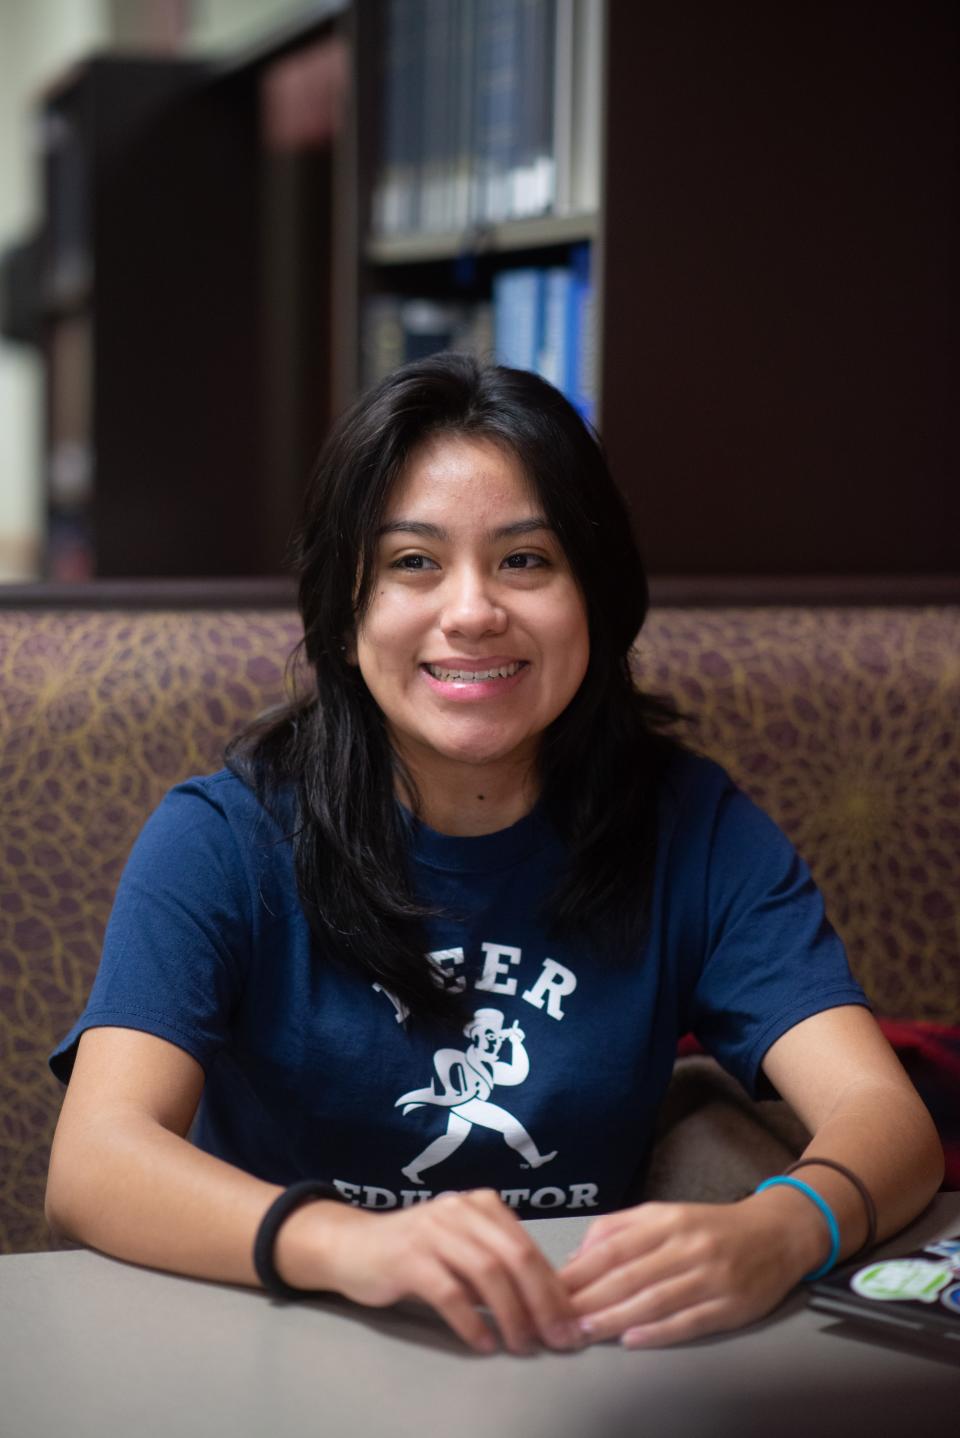 A smile washes over Washburn senior Perla Soto as she talks about her experiences that brought her to the university Wednesday morning at Mabee Library.